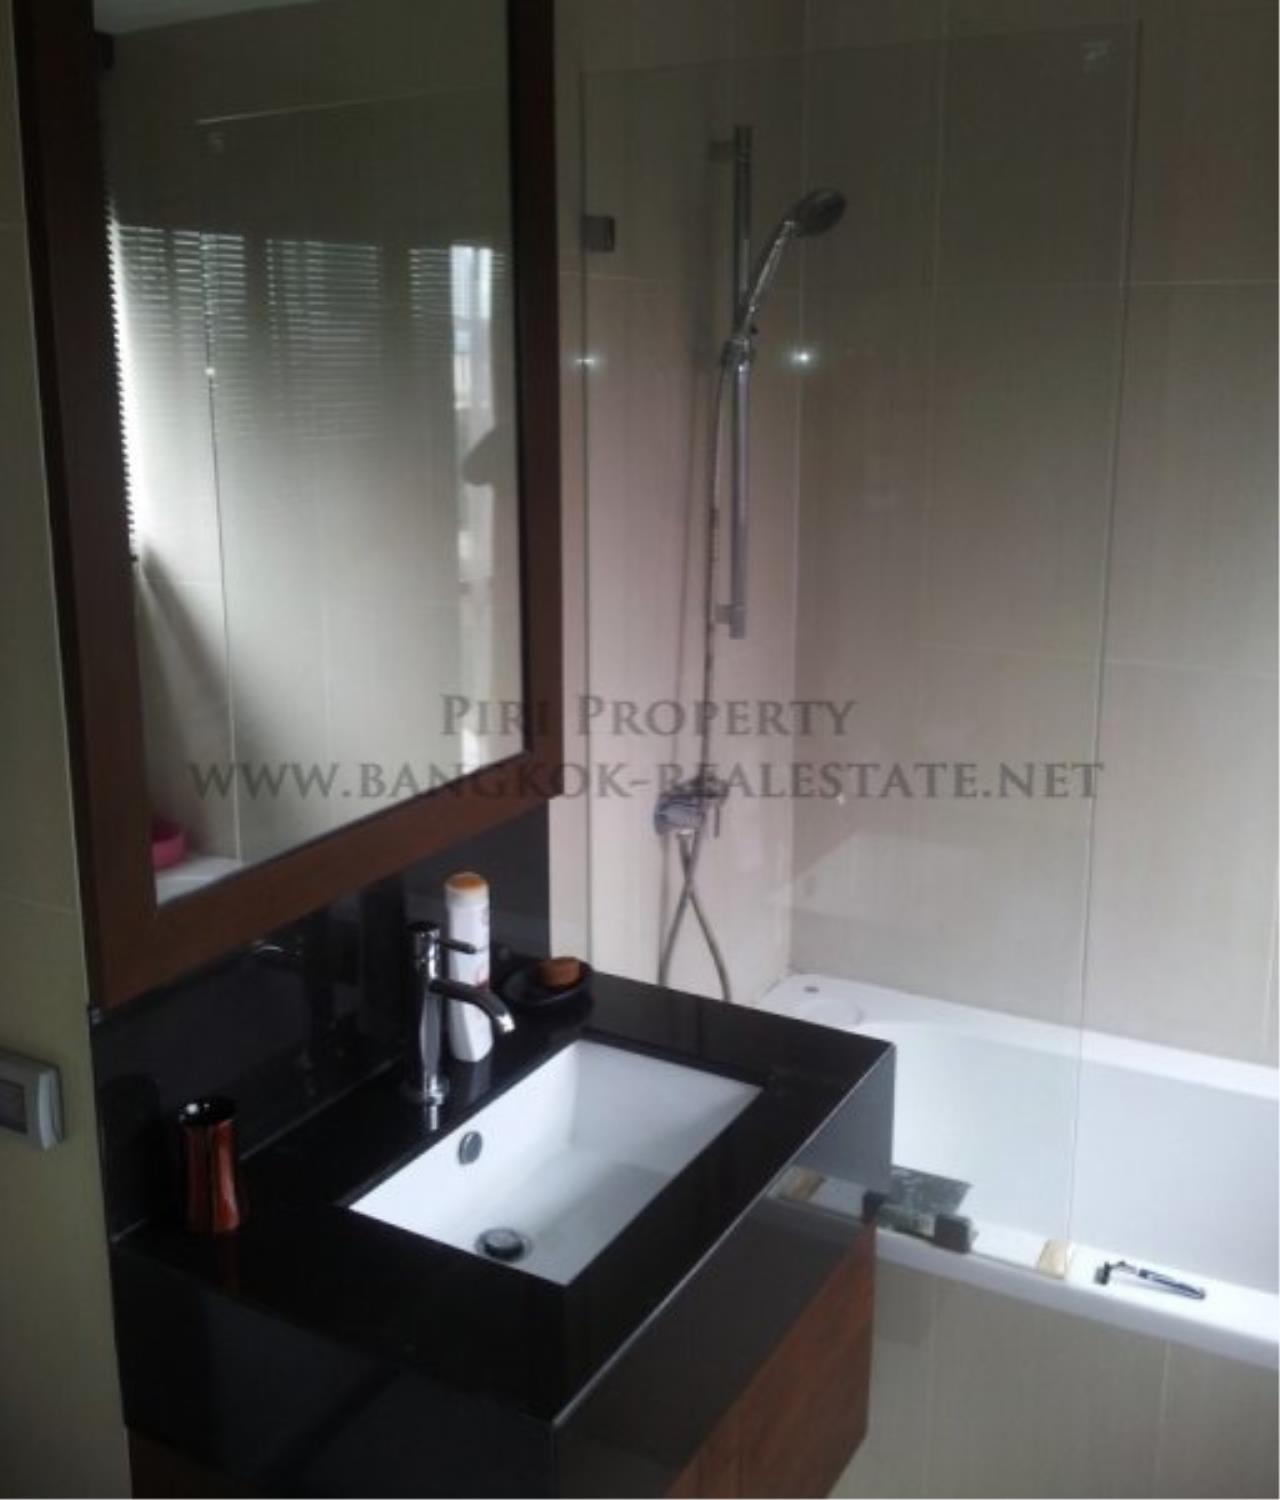 Piri Property Agency's 2 Bedroom Condo for Sale in Sathorn Gardens - 84 SQM on 10th Floor 3